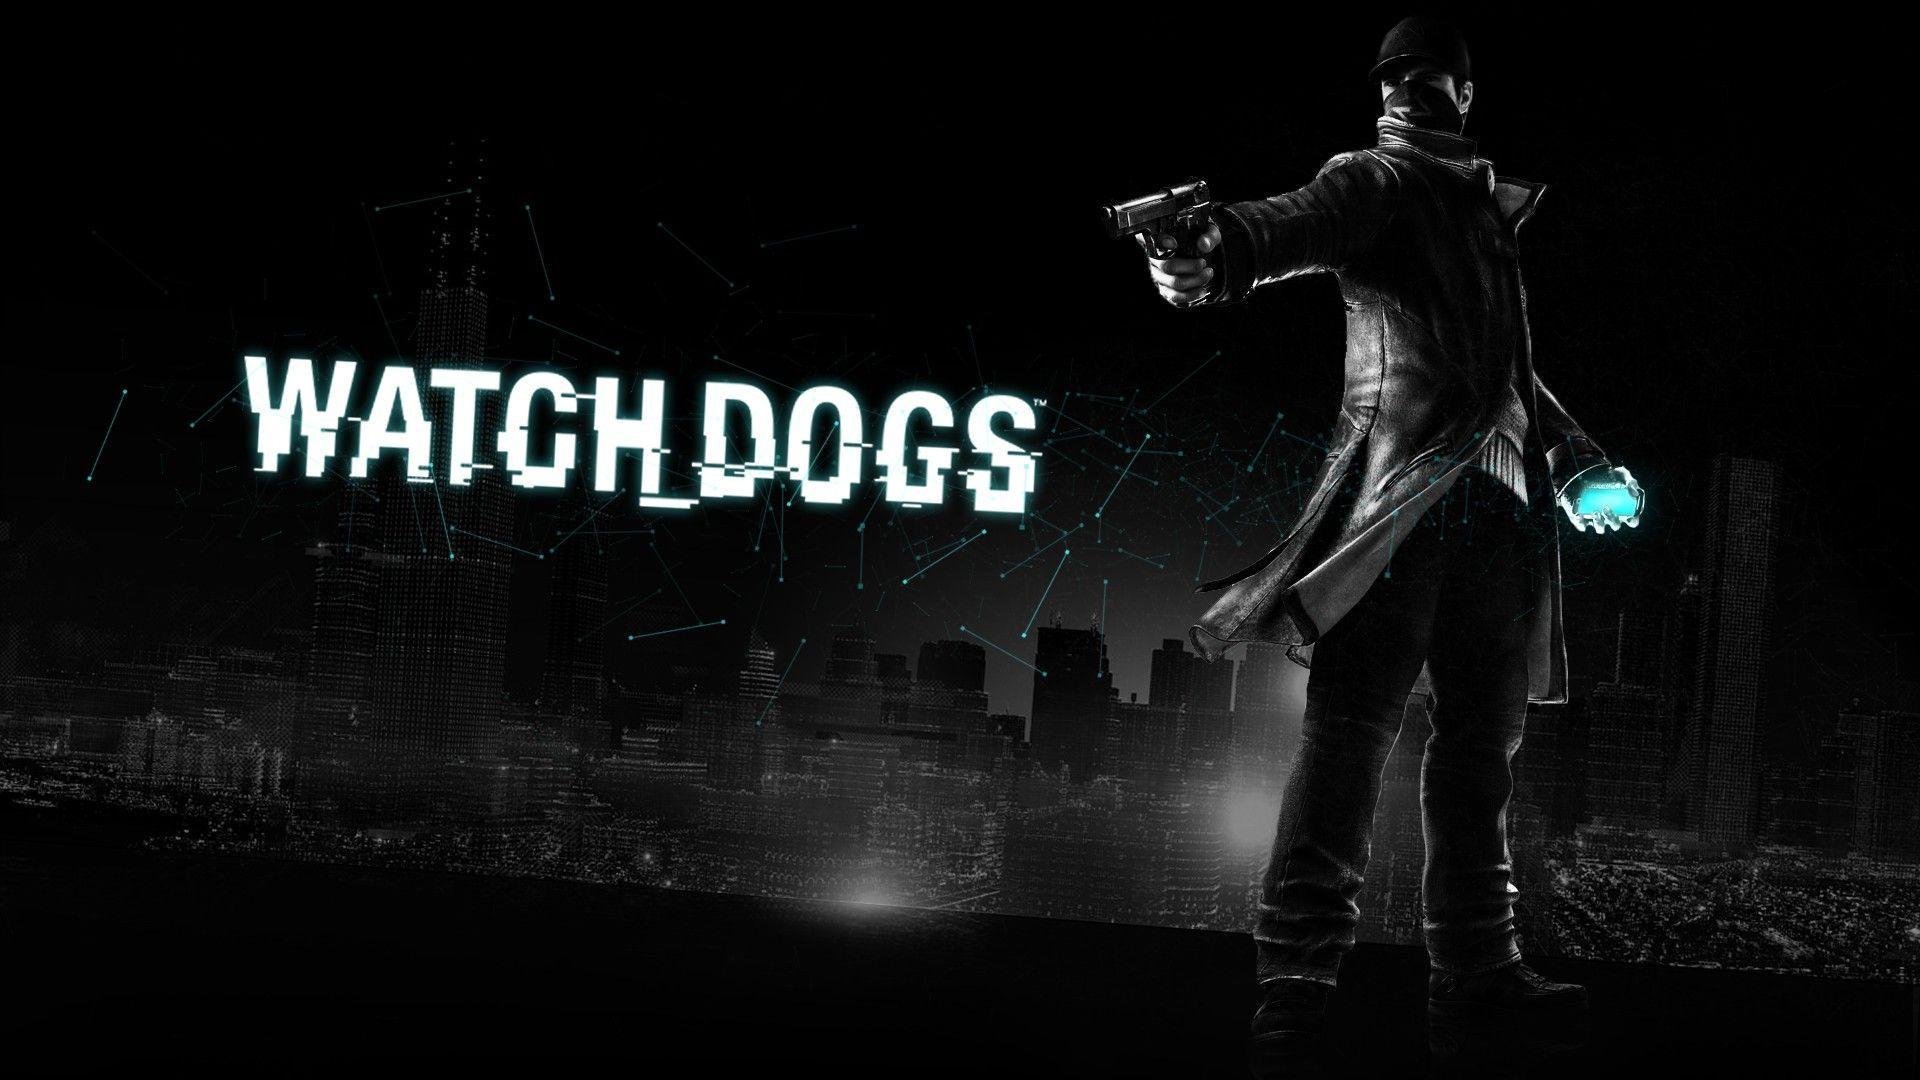 image about Watch Dogs. Dog wallpaper, HD